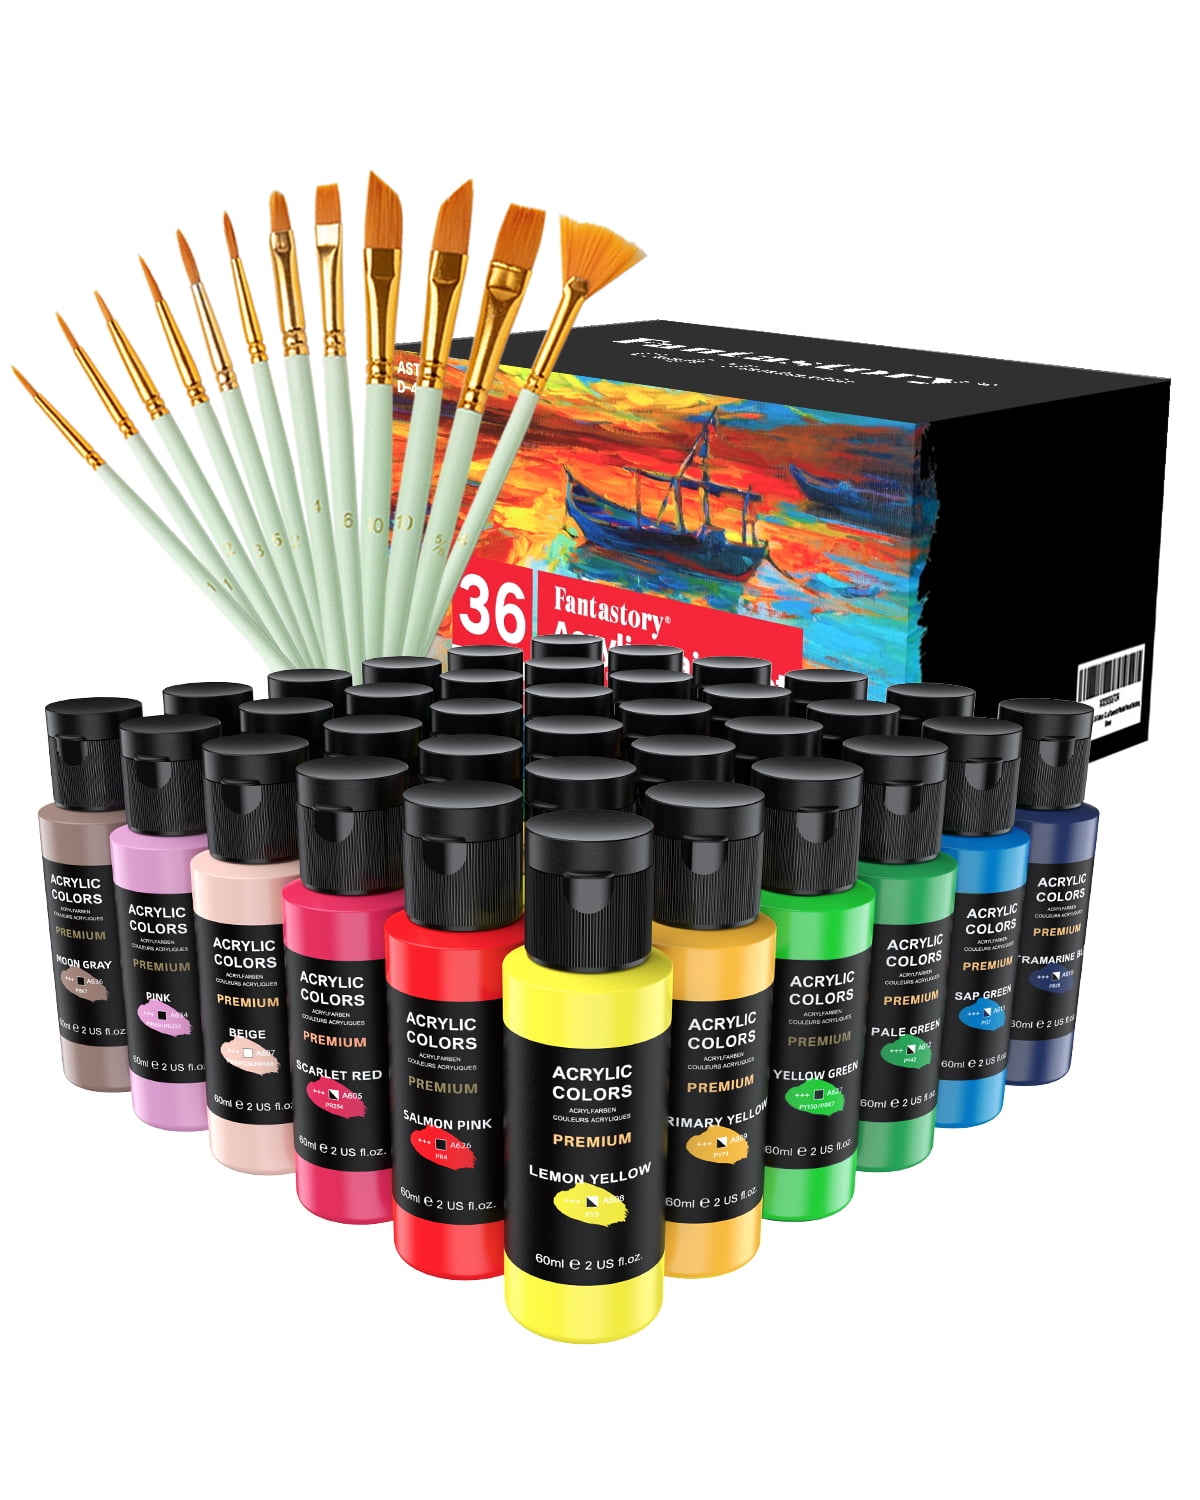 Fantastory fantastory acrylic paint set with 12 brushes, 24  colors(2oz/60ml) craft paint supplies for adults artists kids beginners, pai